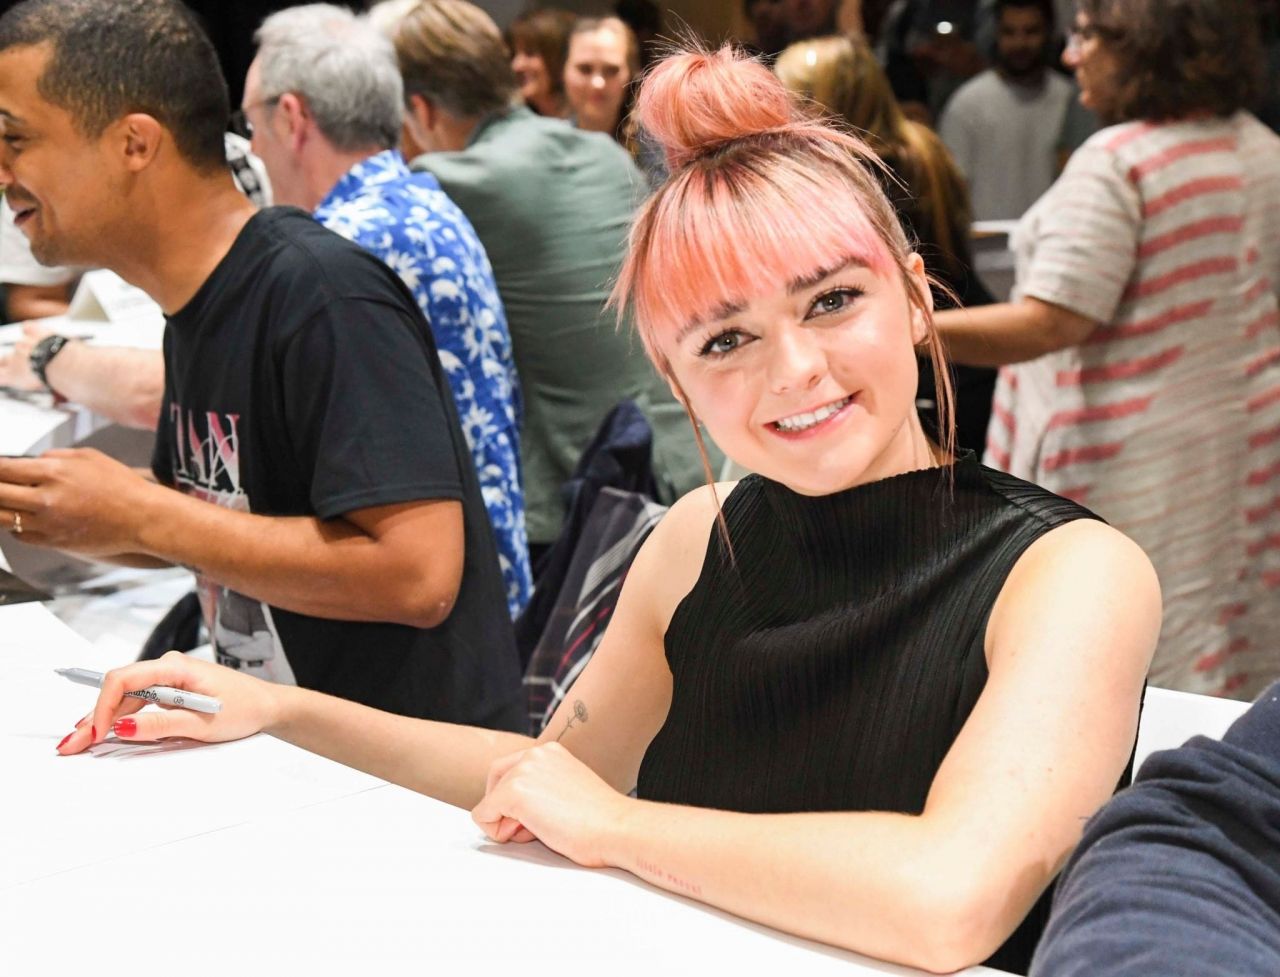 maisie-williams-game-of-thrones-cast-autograph-signing-at-sdcc-2019-9.jpg